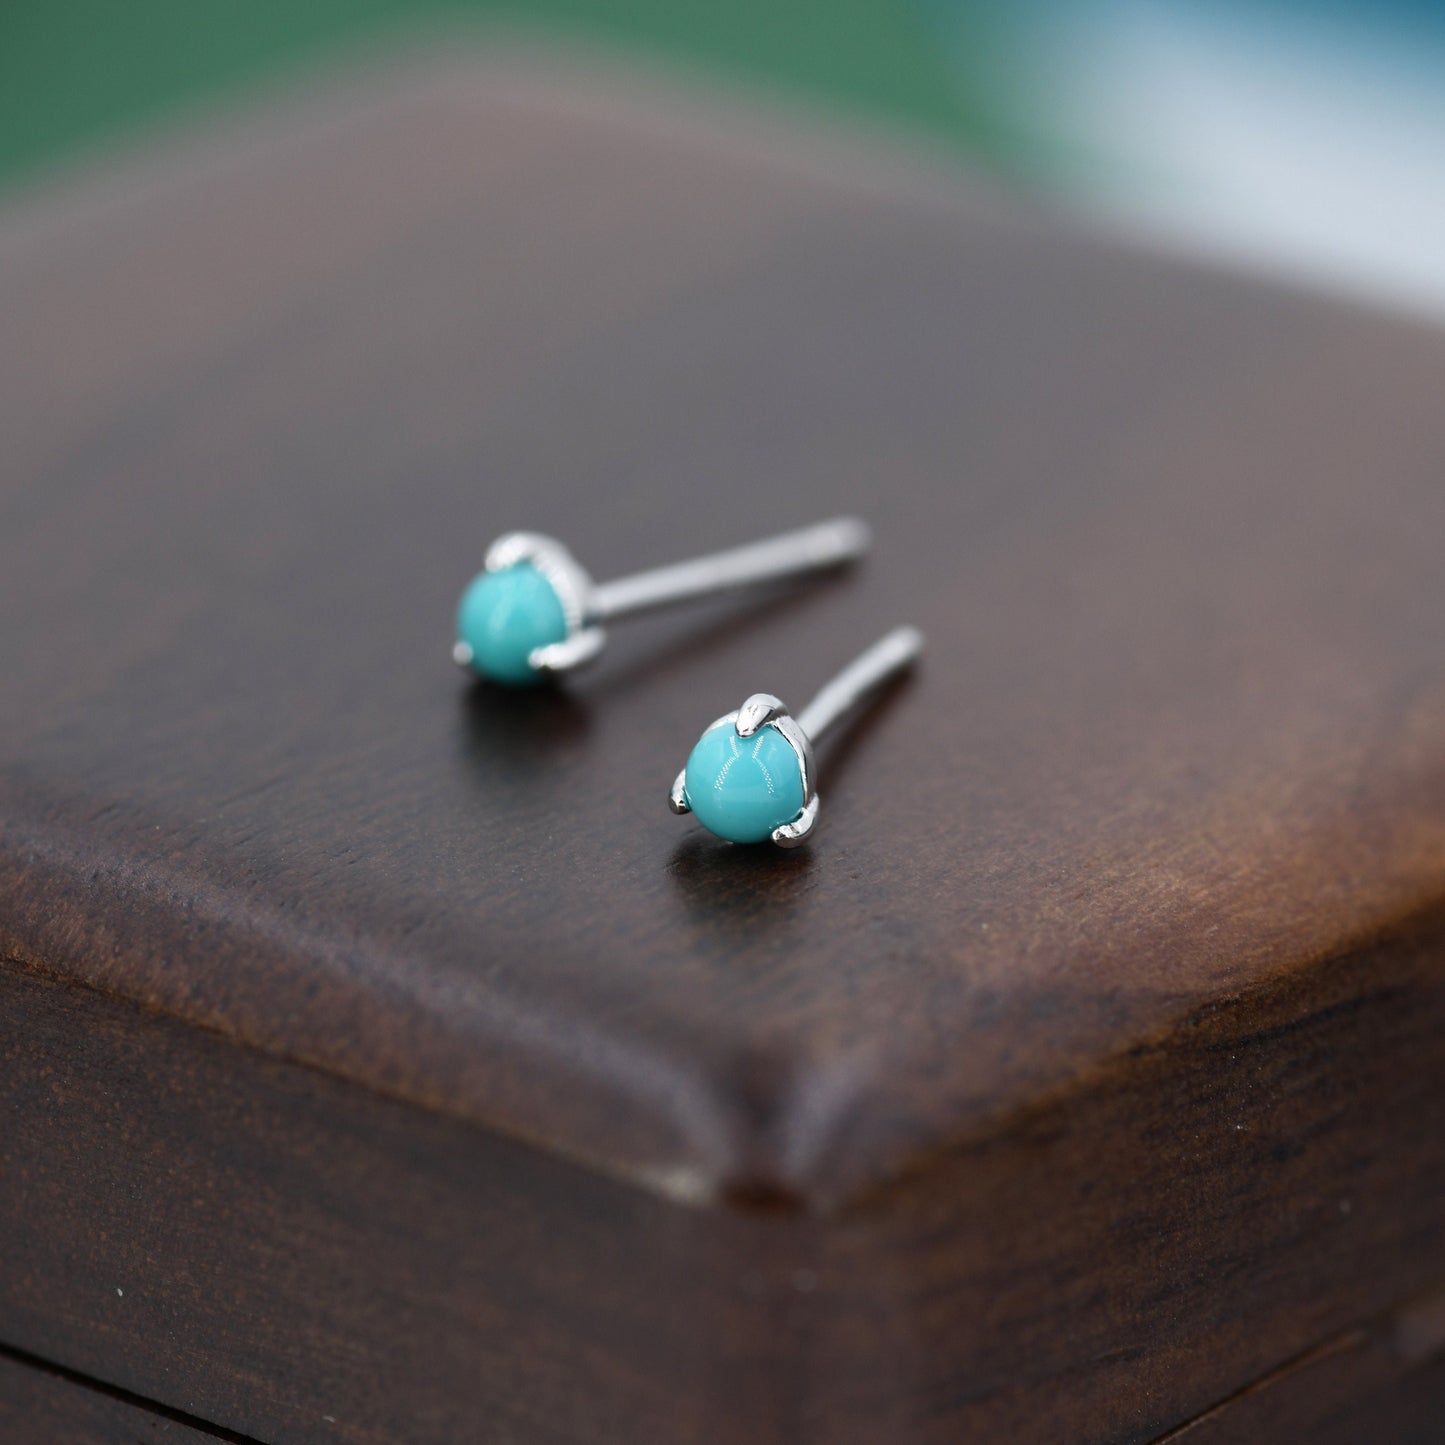 Very Tiny Genuine Turquoise Stone Stud Earrings in Sterling Silver, 3mm Turquoise Stud, Blue Turquoise Earrings, December Birthstone